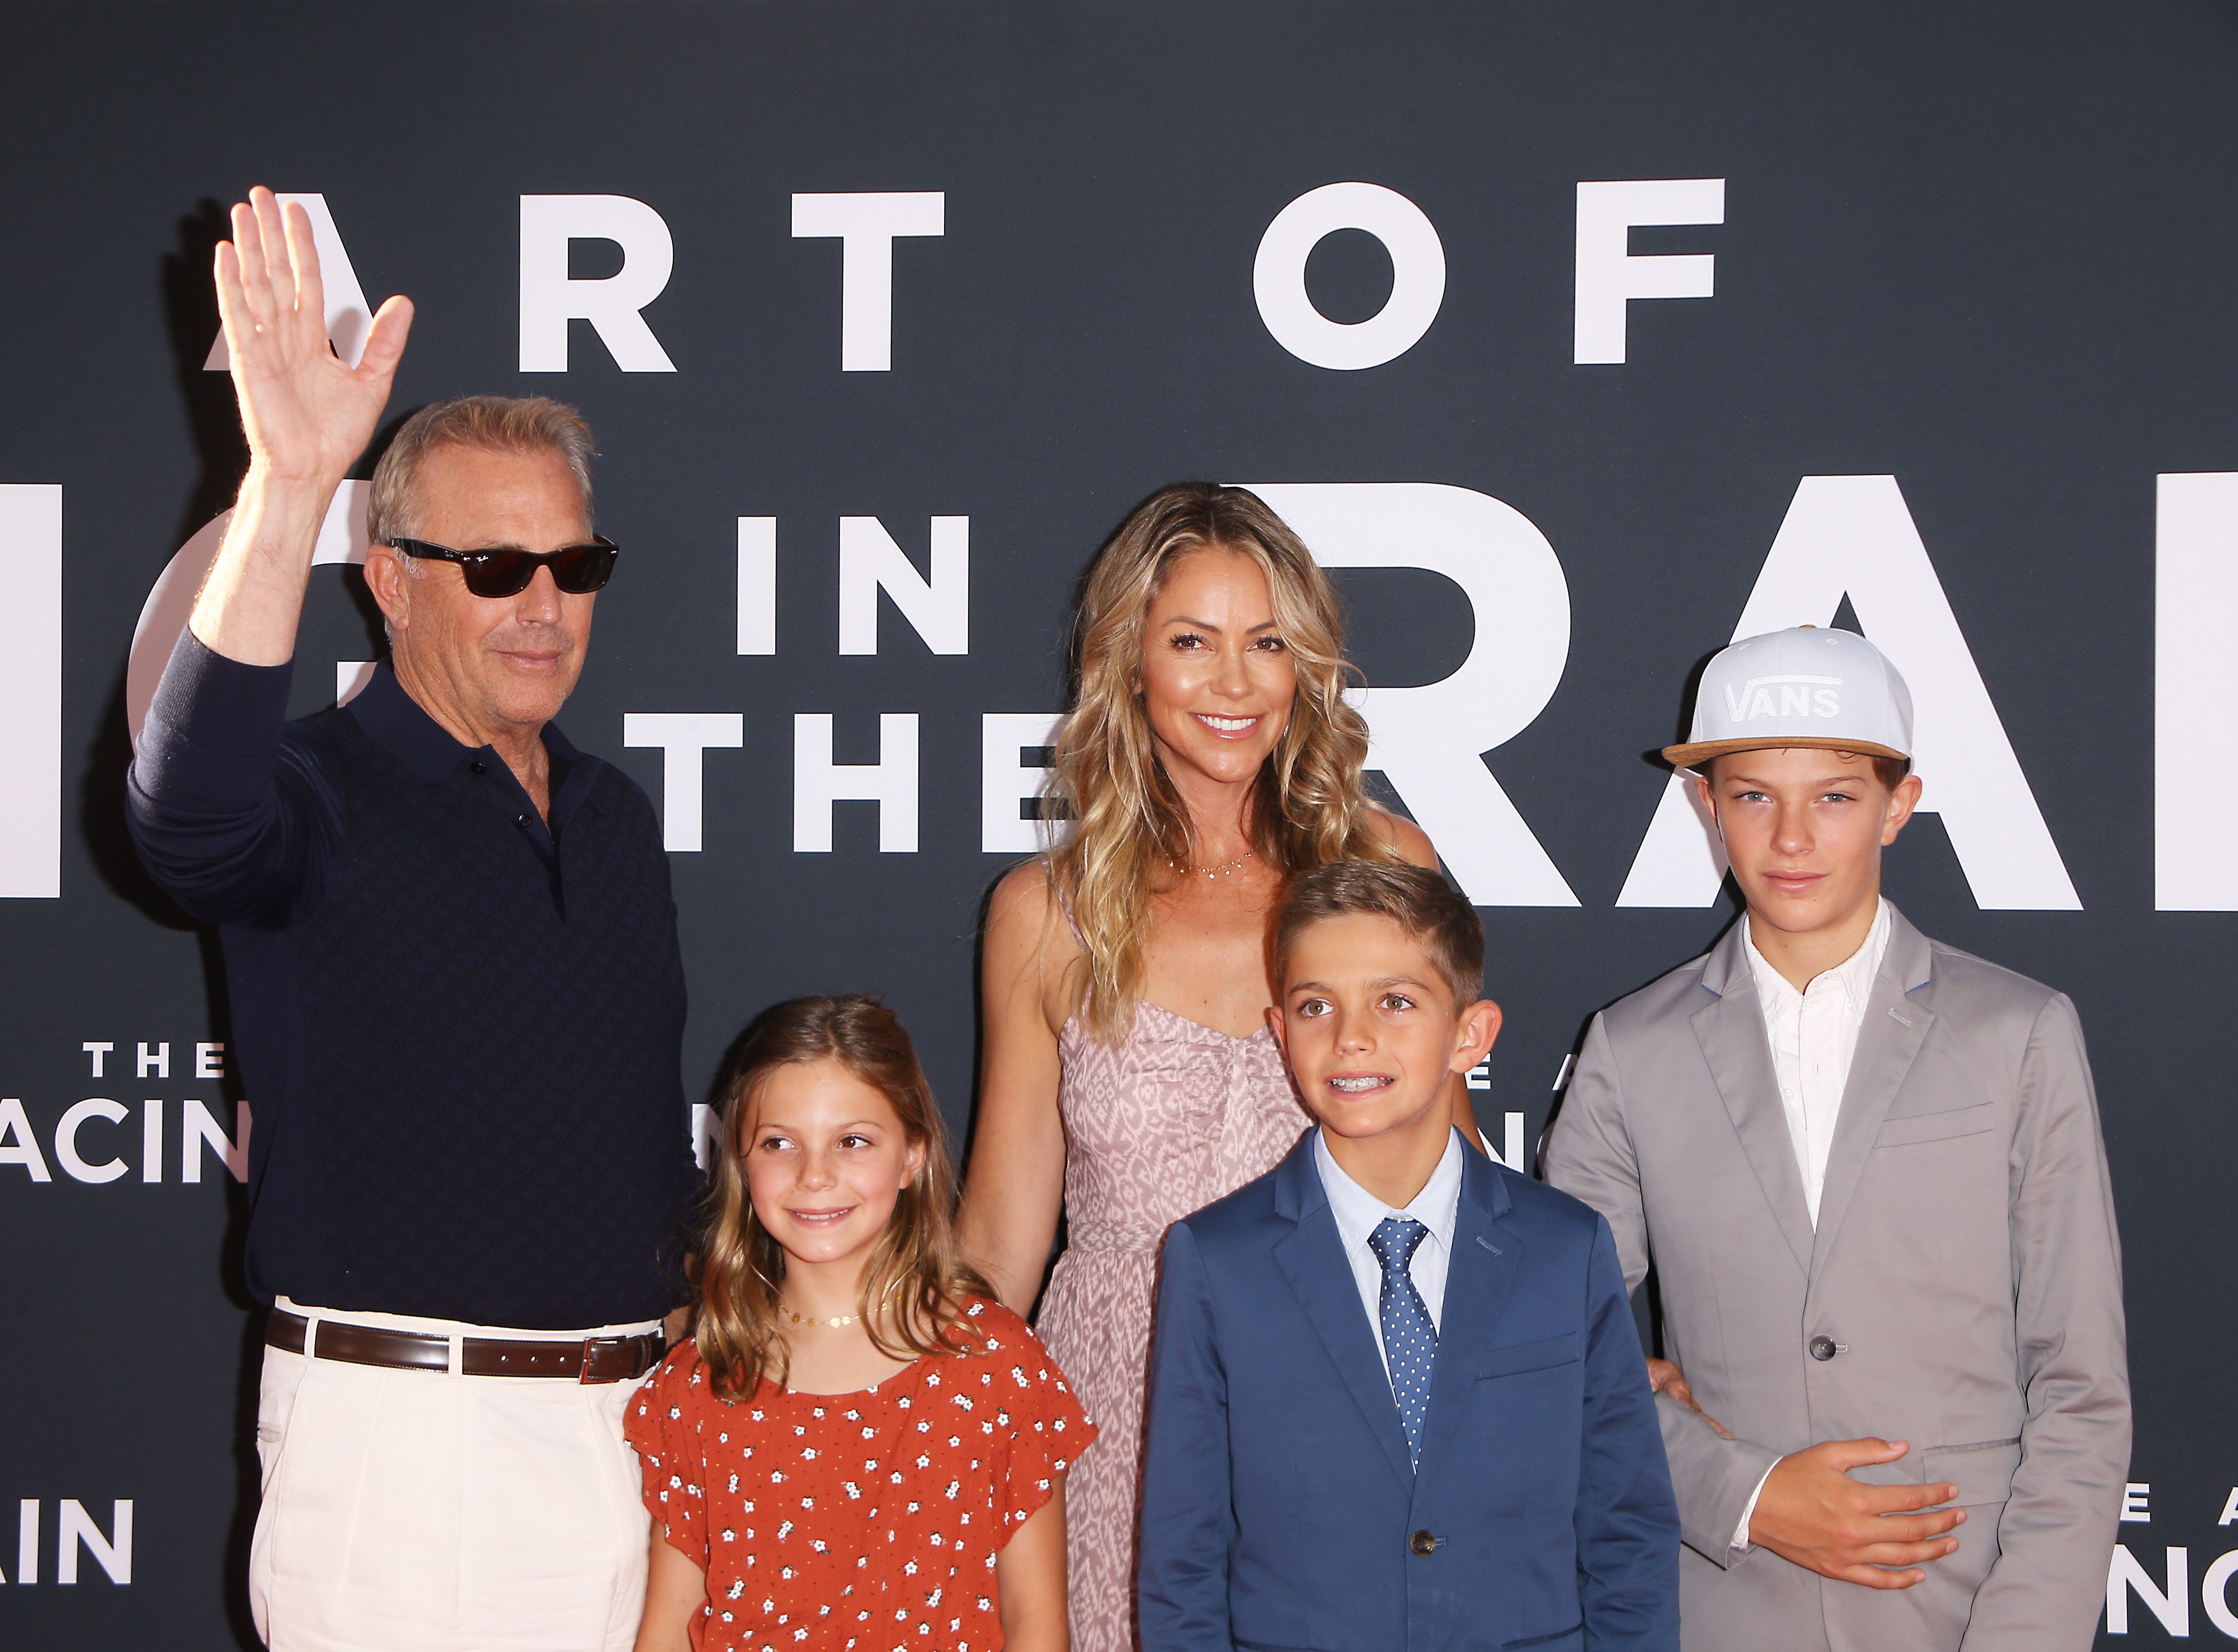 Kevin Costner, Christine Baumgartner and their kits at the Los Angeles premiere of 20th Century Fox's "The Art of Racing In The Rain" held at El Capitan Theatre on August 01, 2019 in Los Angeles, California. | Source: Shutterstock